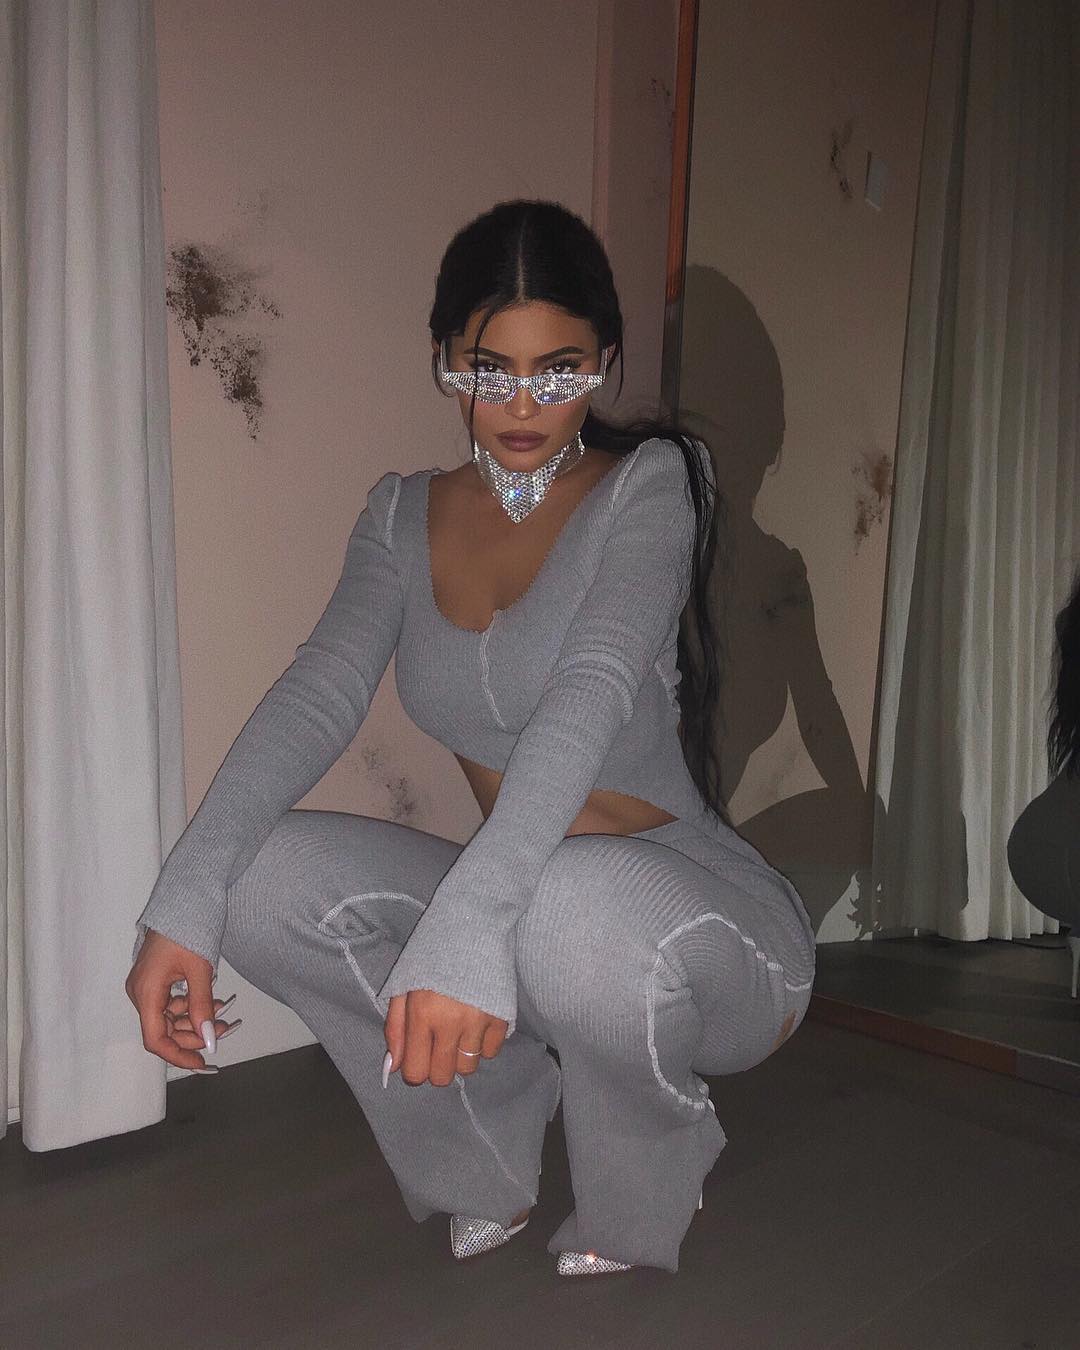 Kylie Jenner goes into mama bear mode. Over her wallpaper. WHO